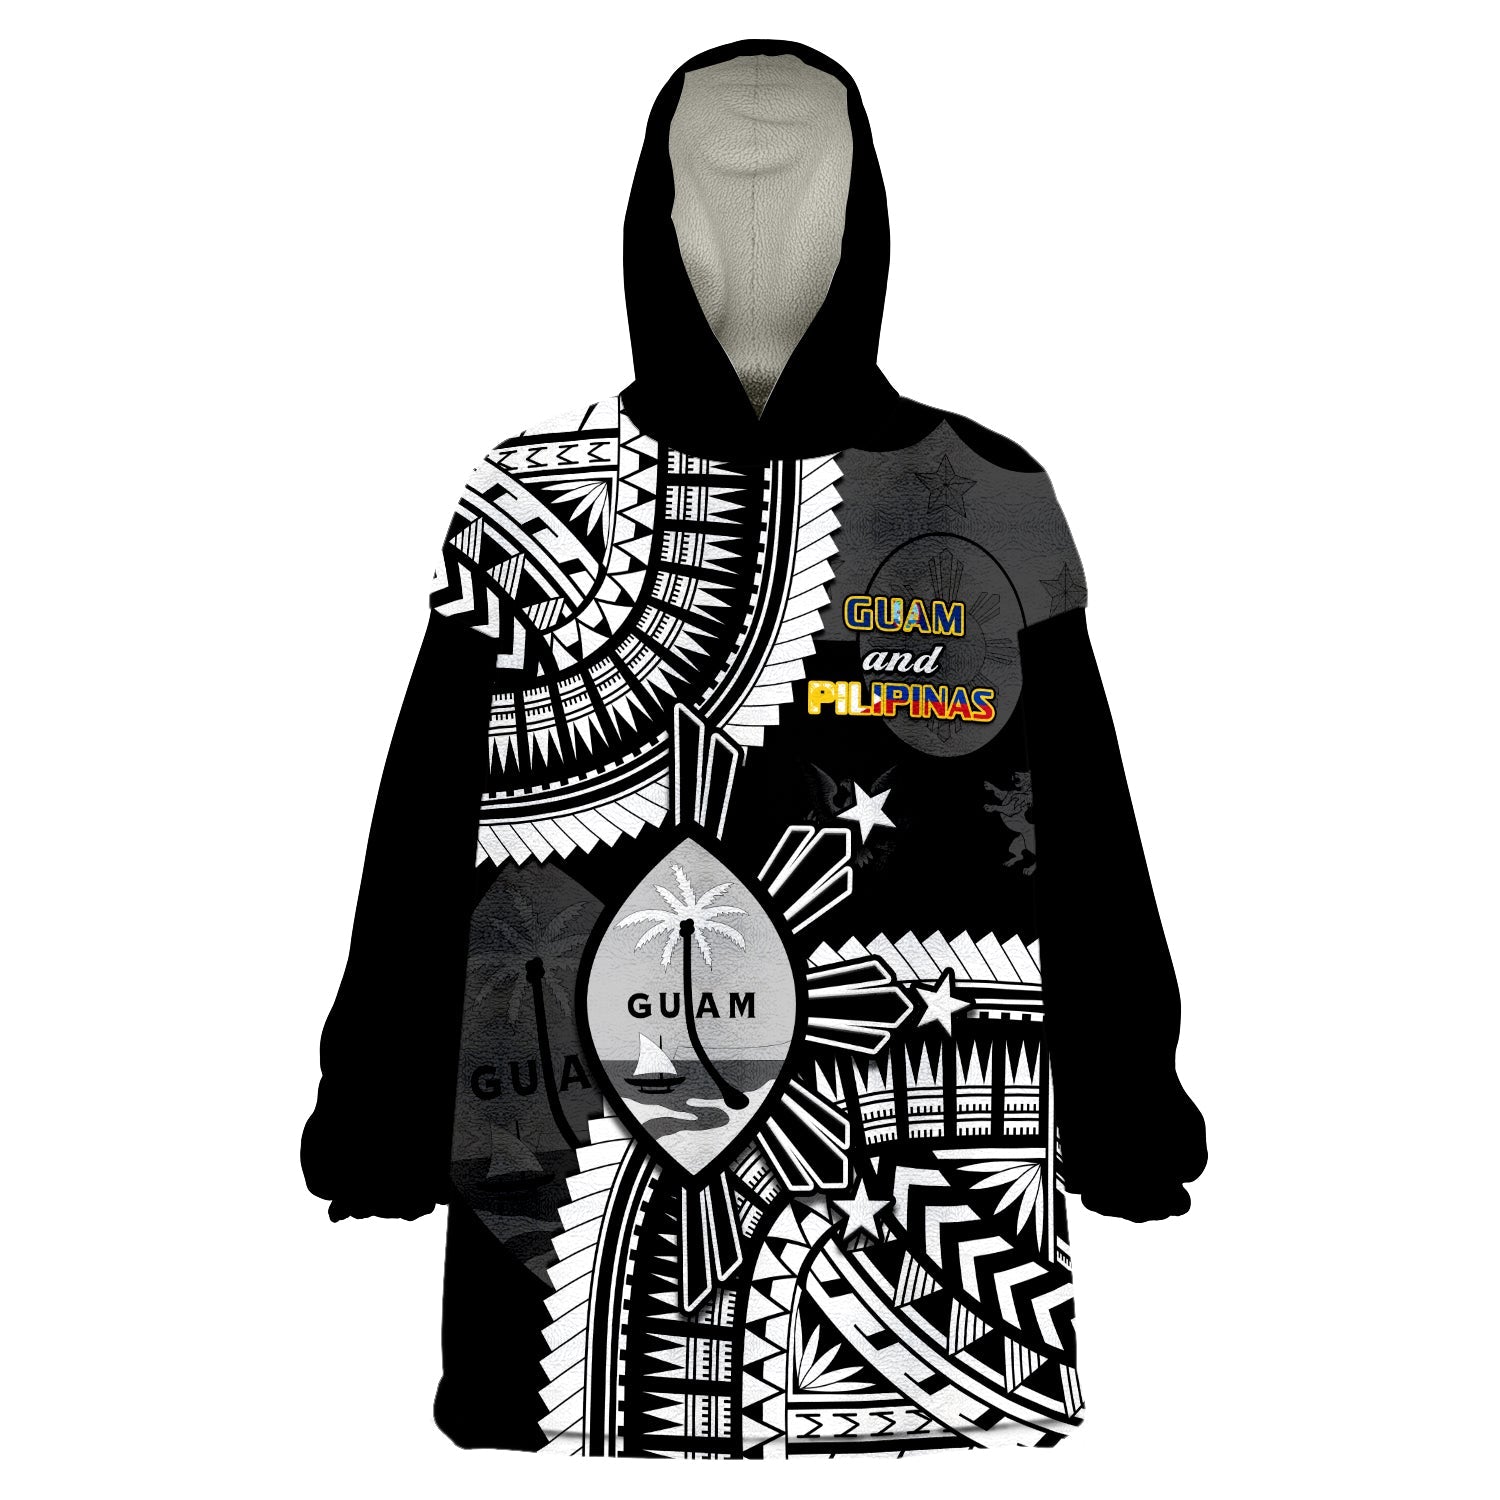 (Custom Personalised) Guam and Philippines Wearable Blanket Hoodie Guaman Filipinas Together Black LT14 Unisex One Size - Polynesian Pride